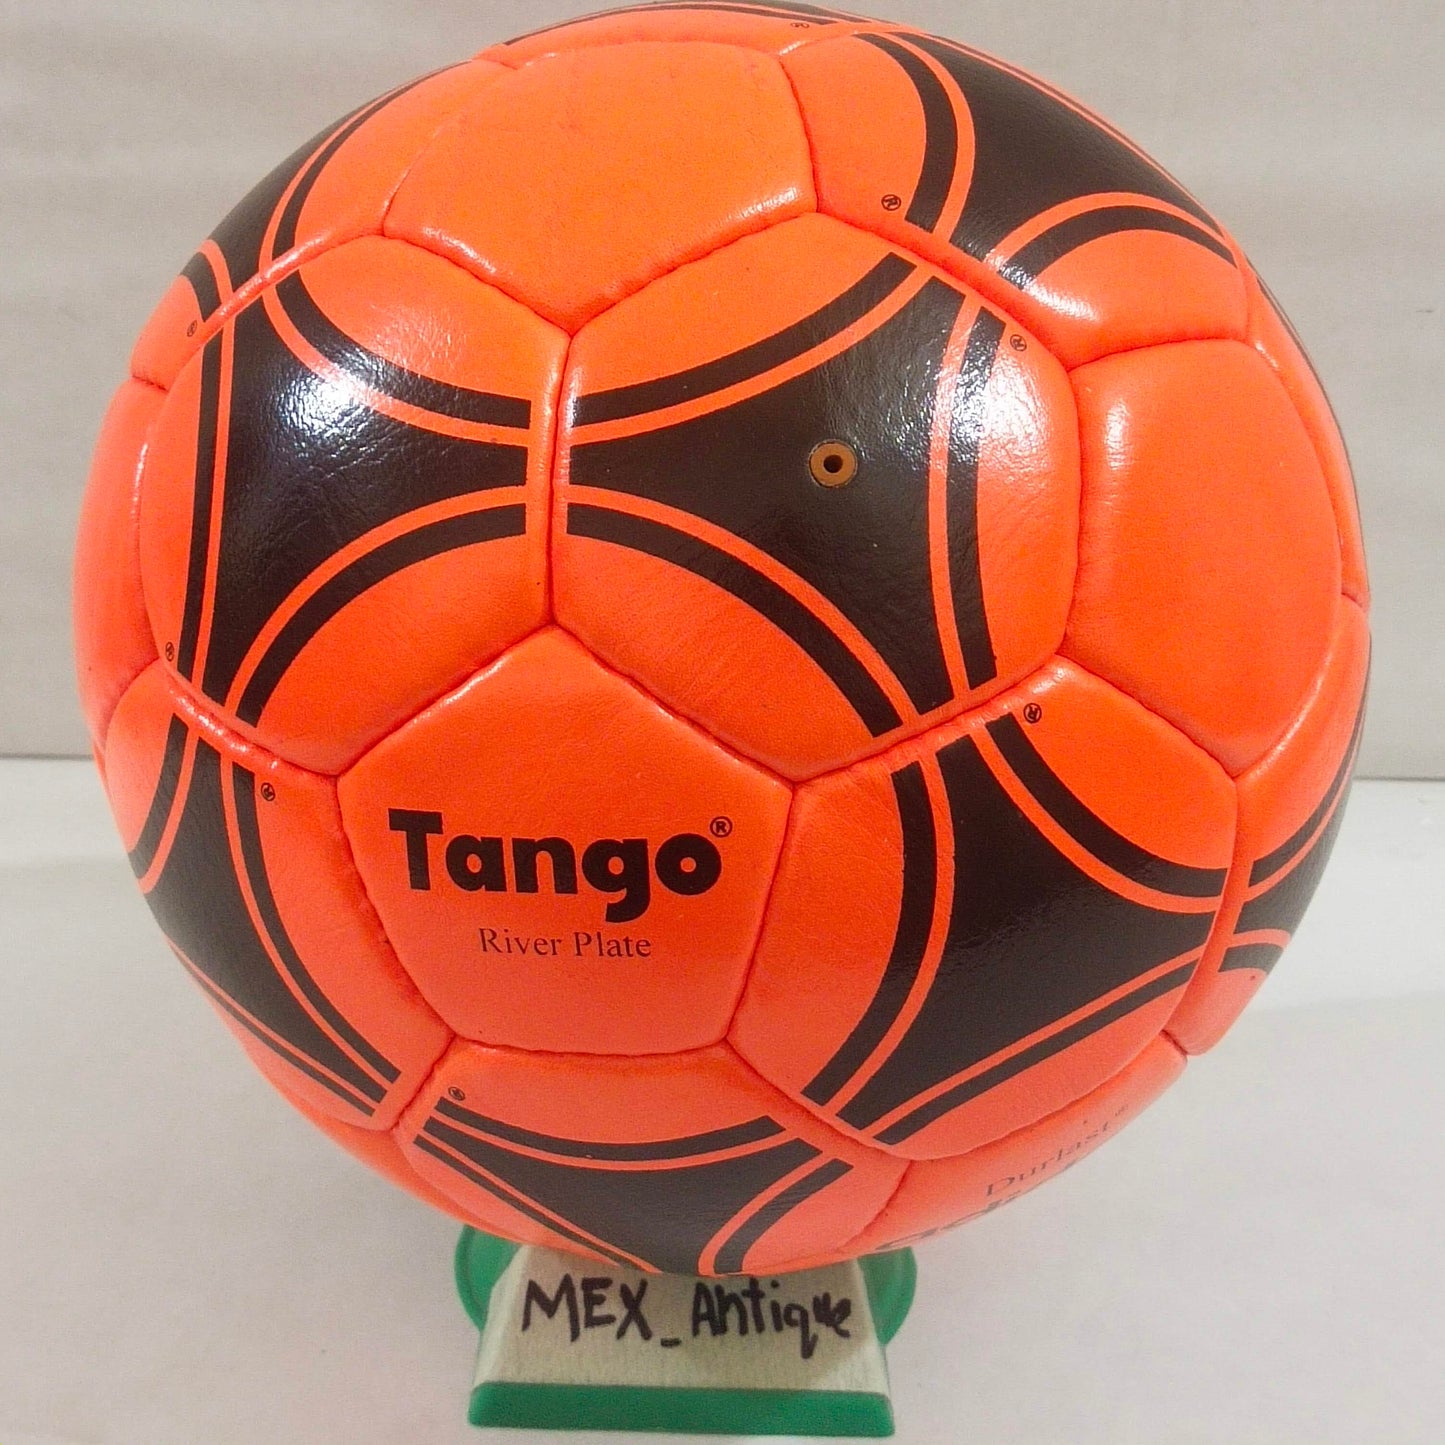 Adidas Tango River Plate | FIFA World Cup 1978 | Winter Ball | Genuine Leather l SIZE 5 03